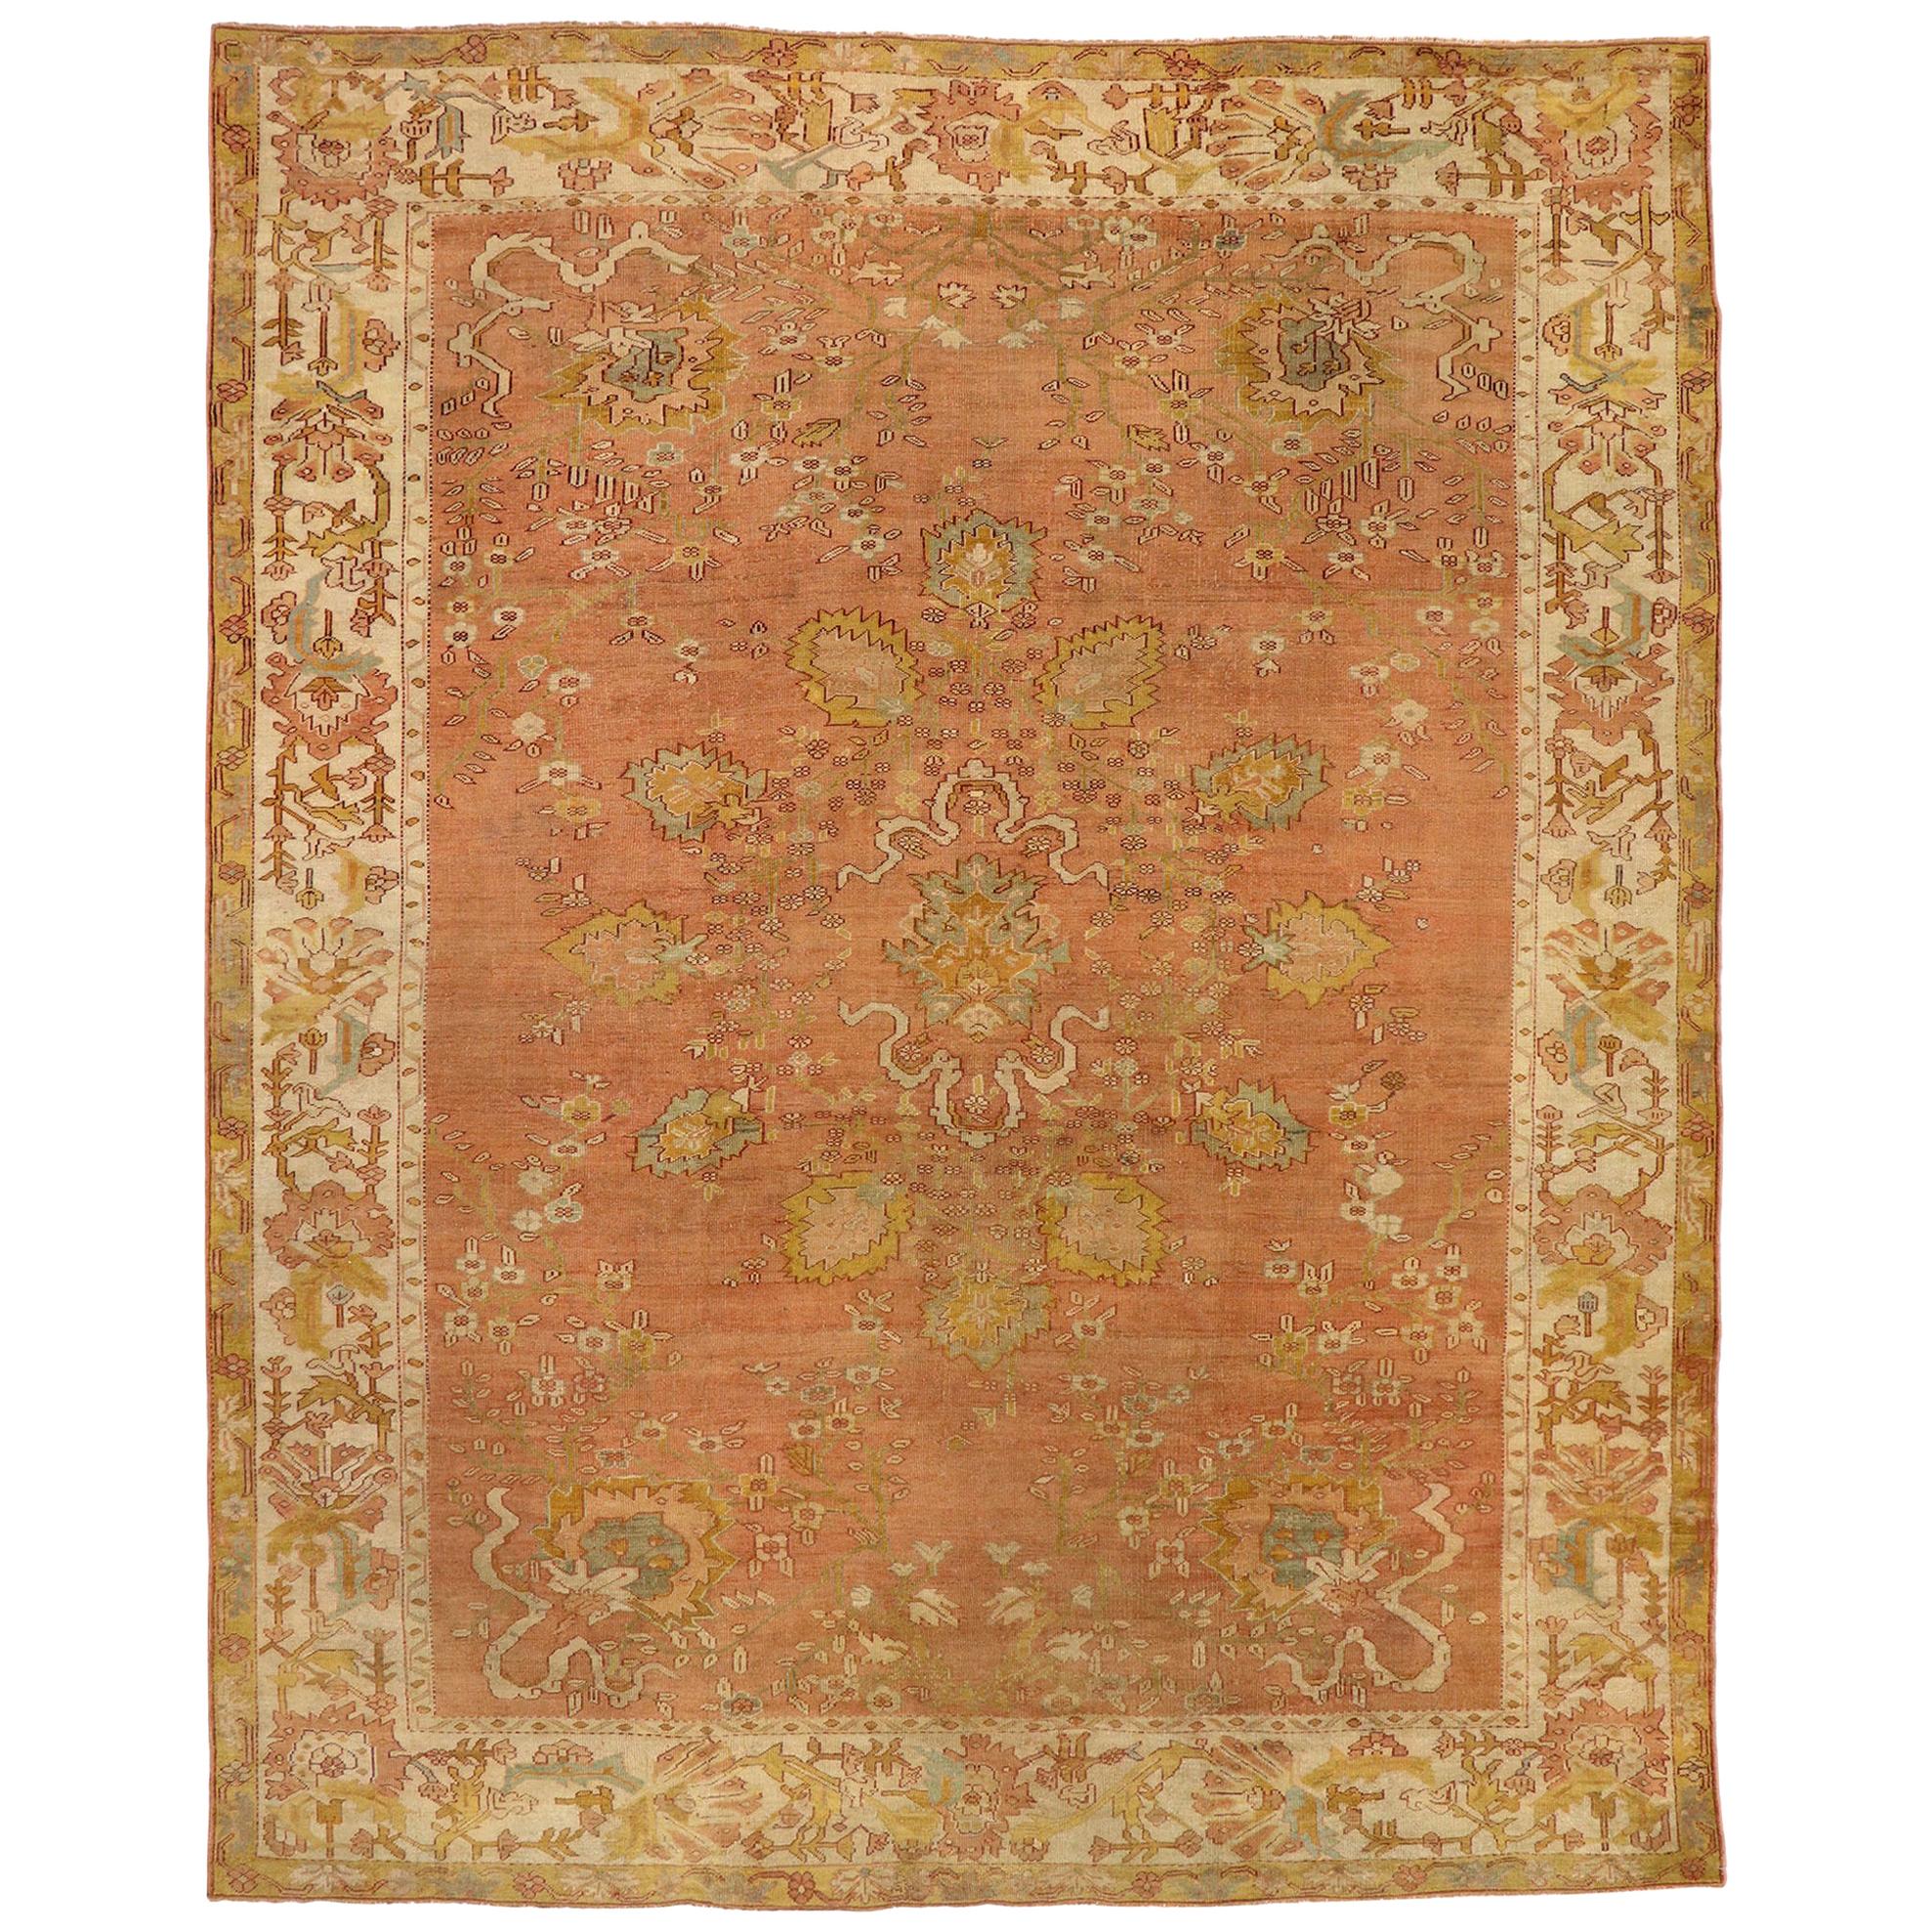 Distressed Antique Turkish Oushak Area Rug with Rustic Neoclassical Style